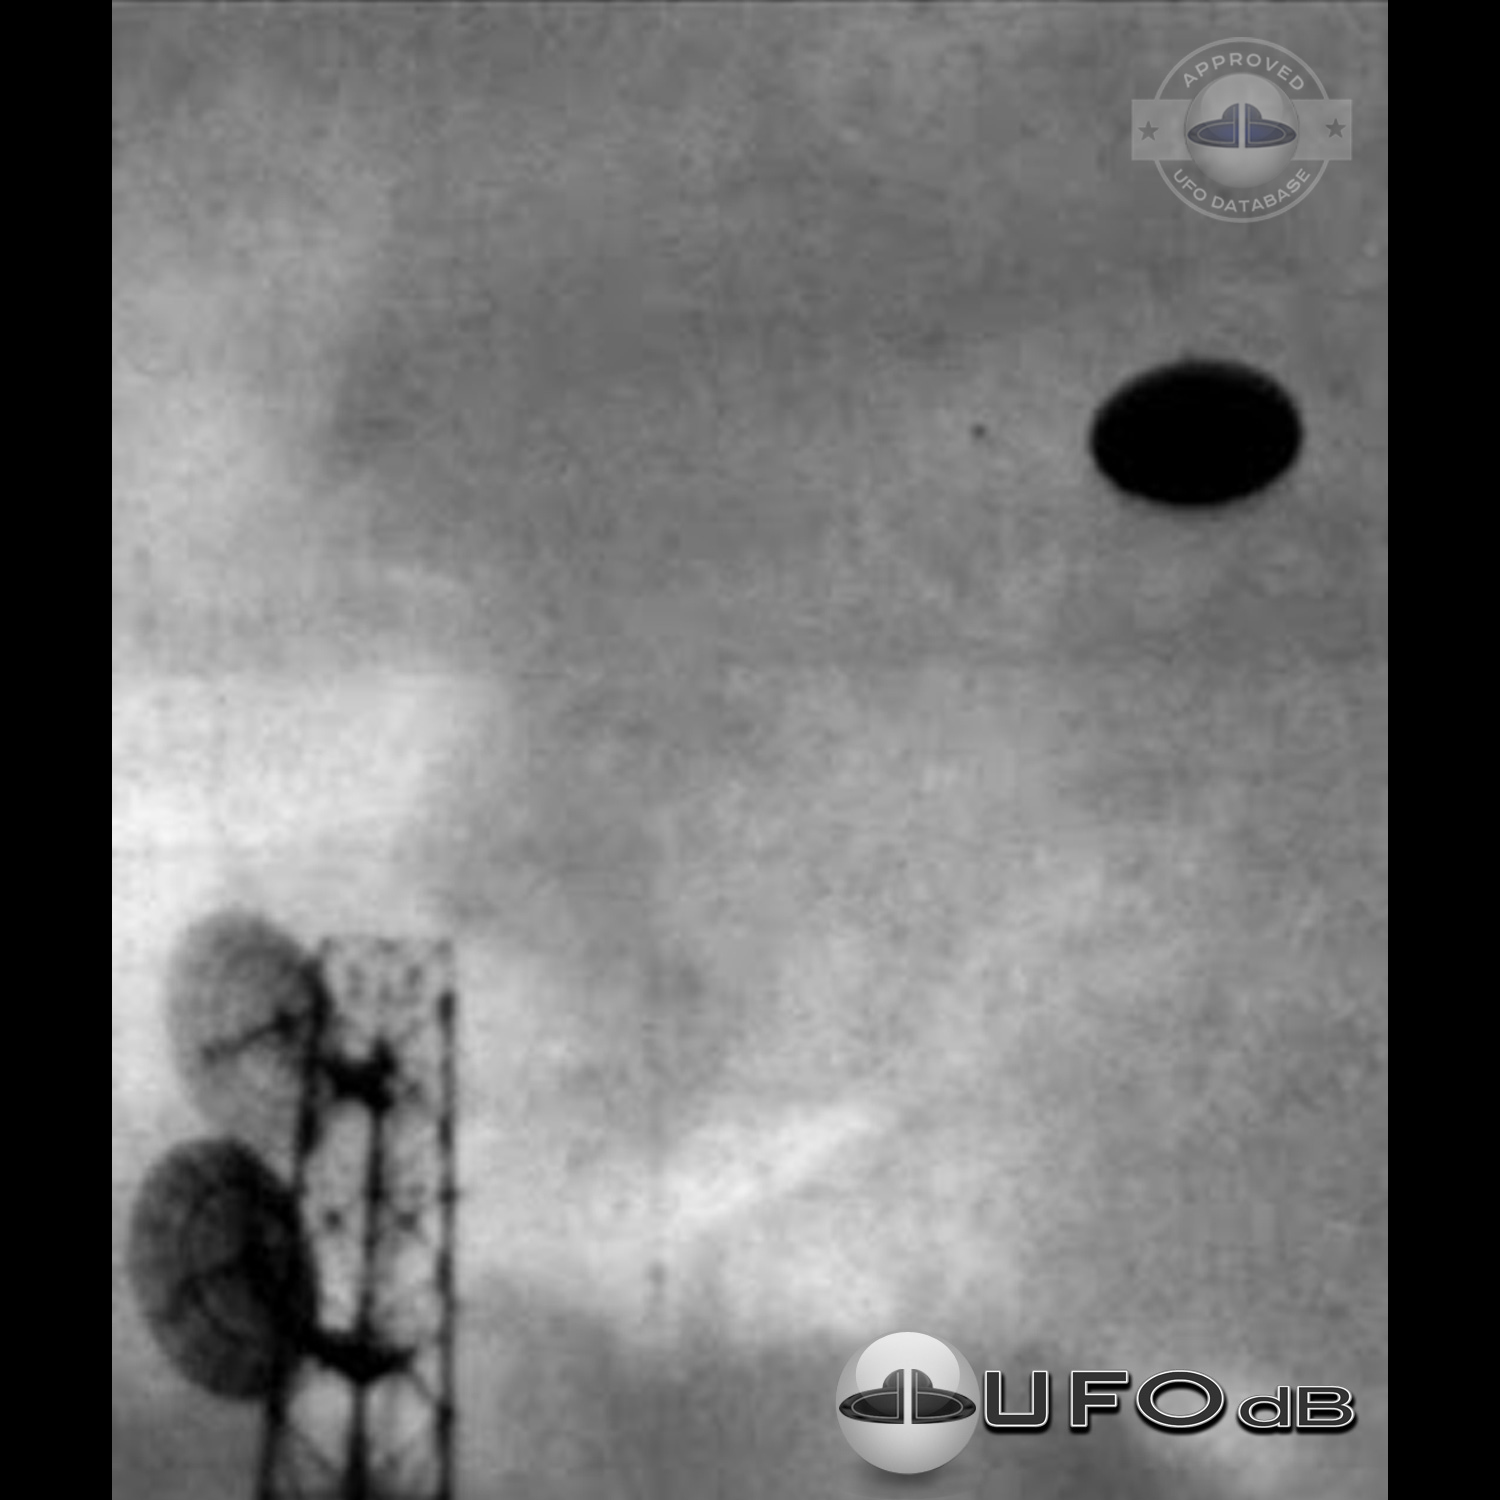 UFO passing near a communication tower in a cloudy sky Pescara Italy UFO Picture #125-1